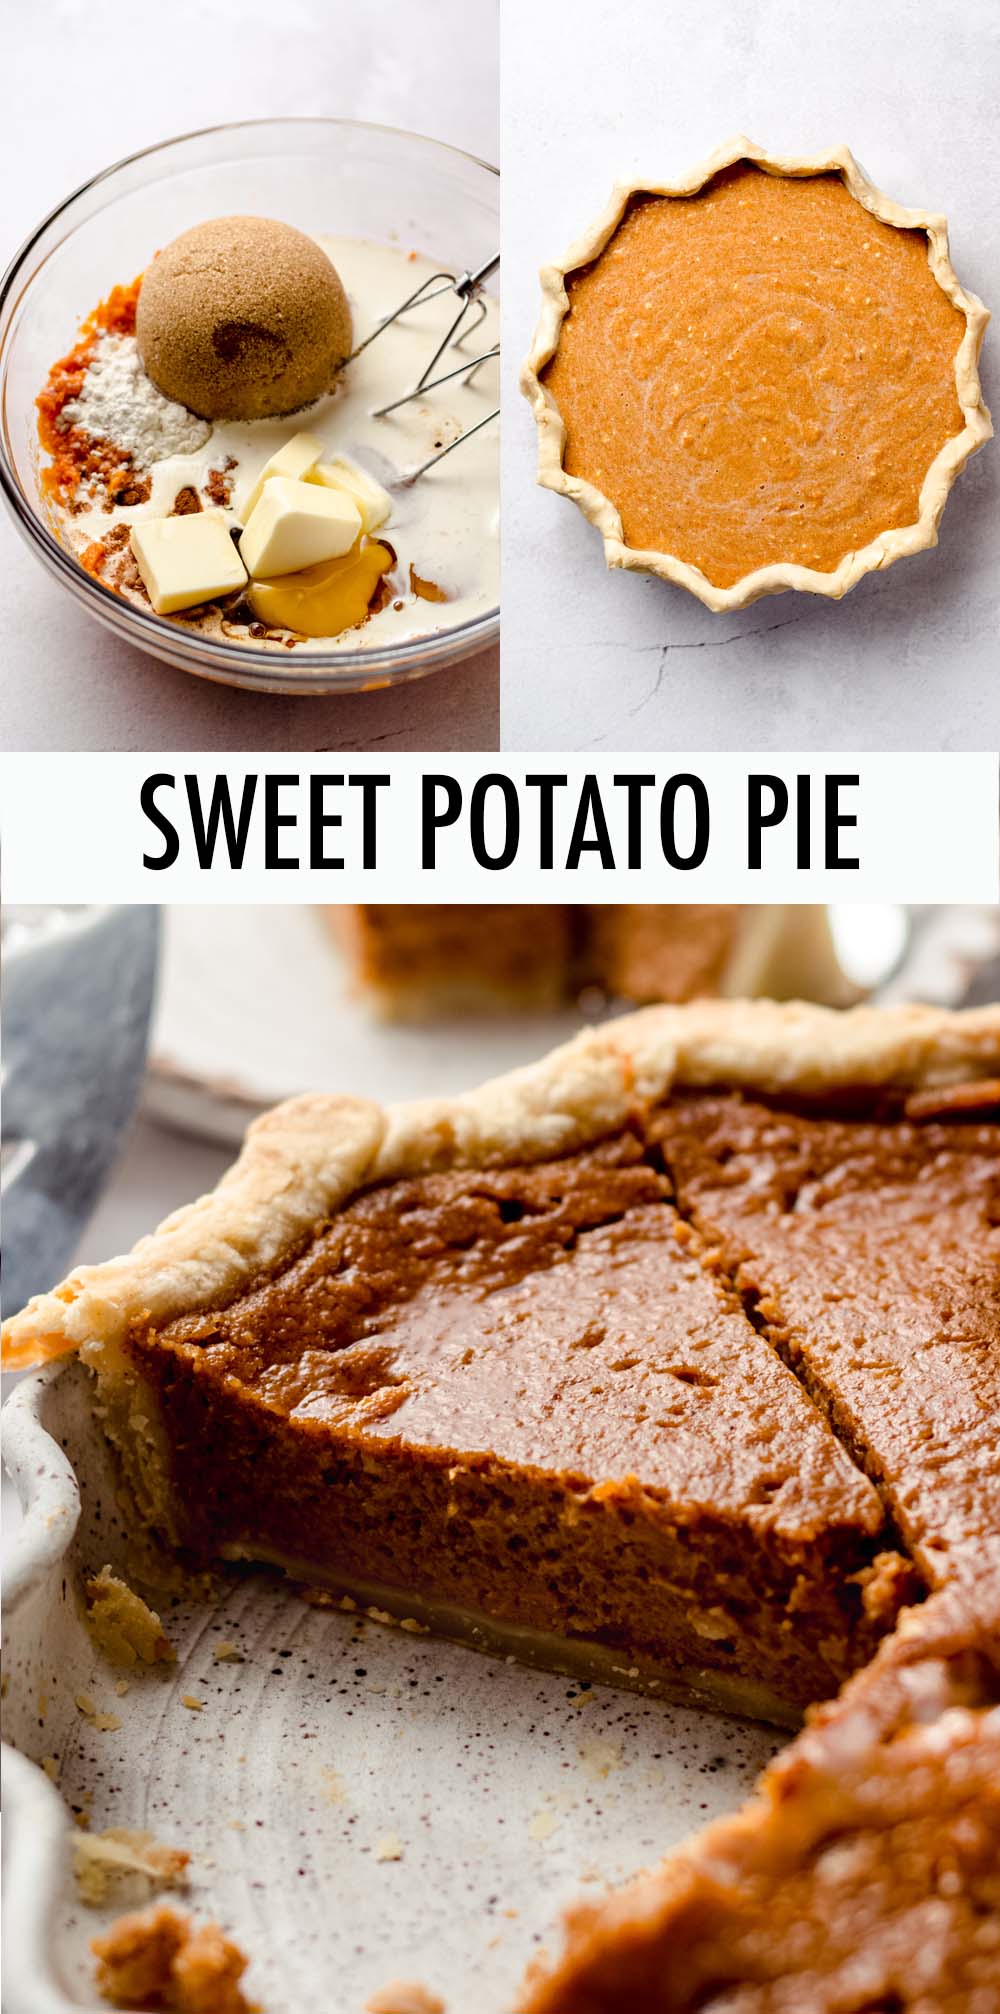 This homemade sweet potato pie is perfectly sweetened with brown sugar and spiced with the flavors you love in fall. Top it with fresh whipped cream for a simple yet impressive dessert for your Thanksgiving spread. via @frshaprilflours